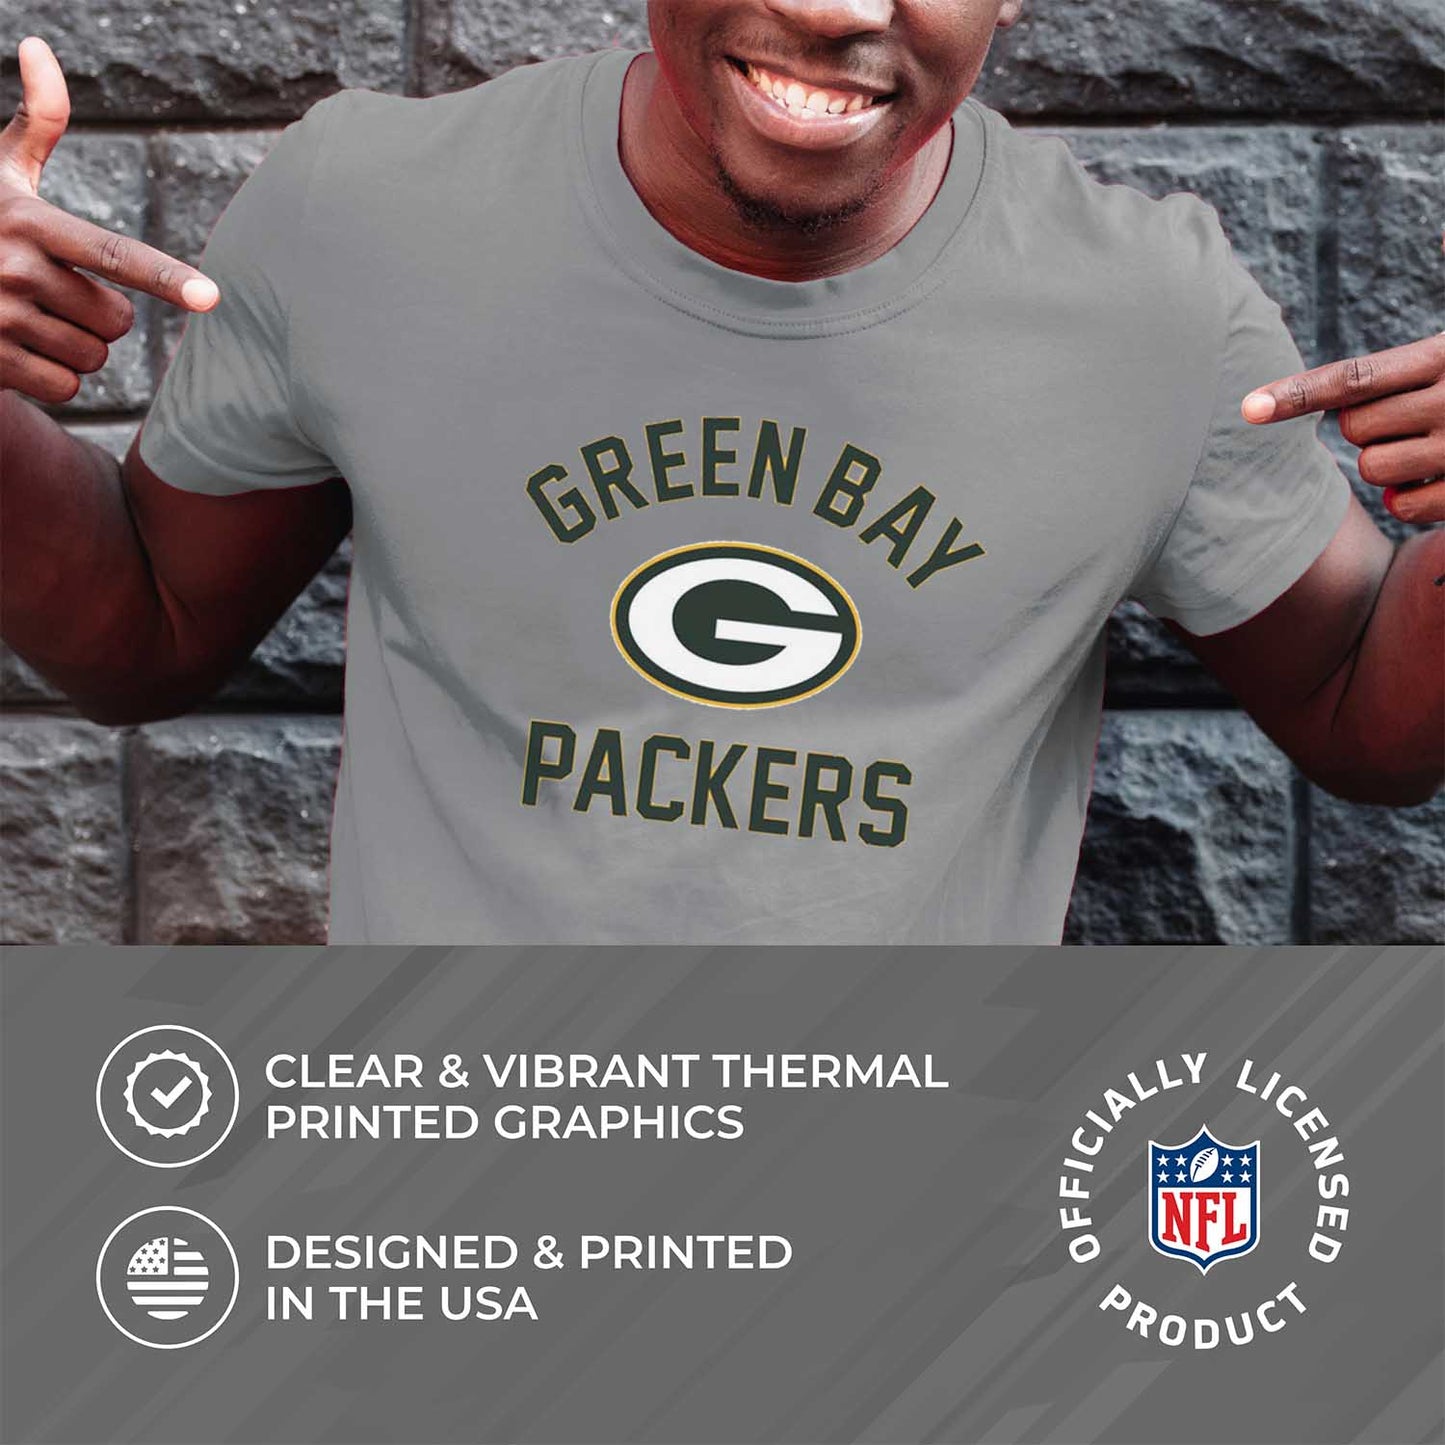 Green Bay Packers NFL Adult Gameday T-Shirt - Gray